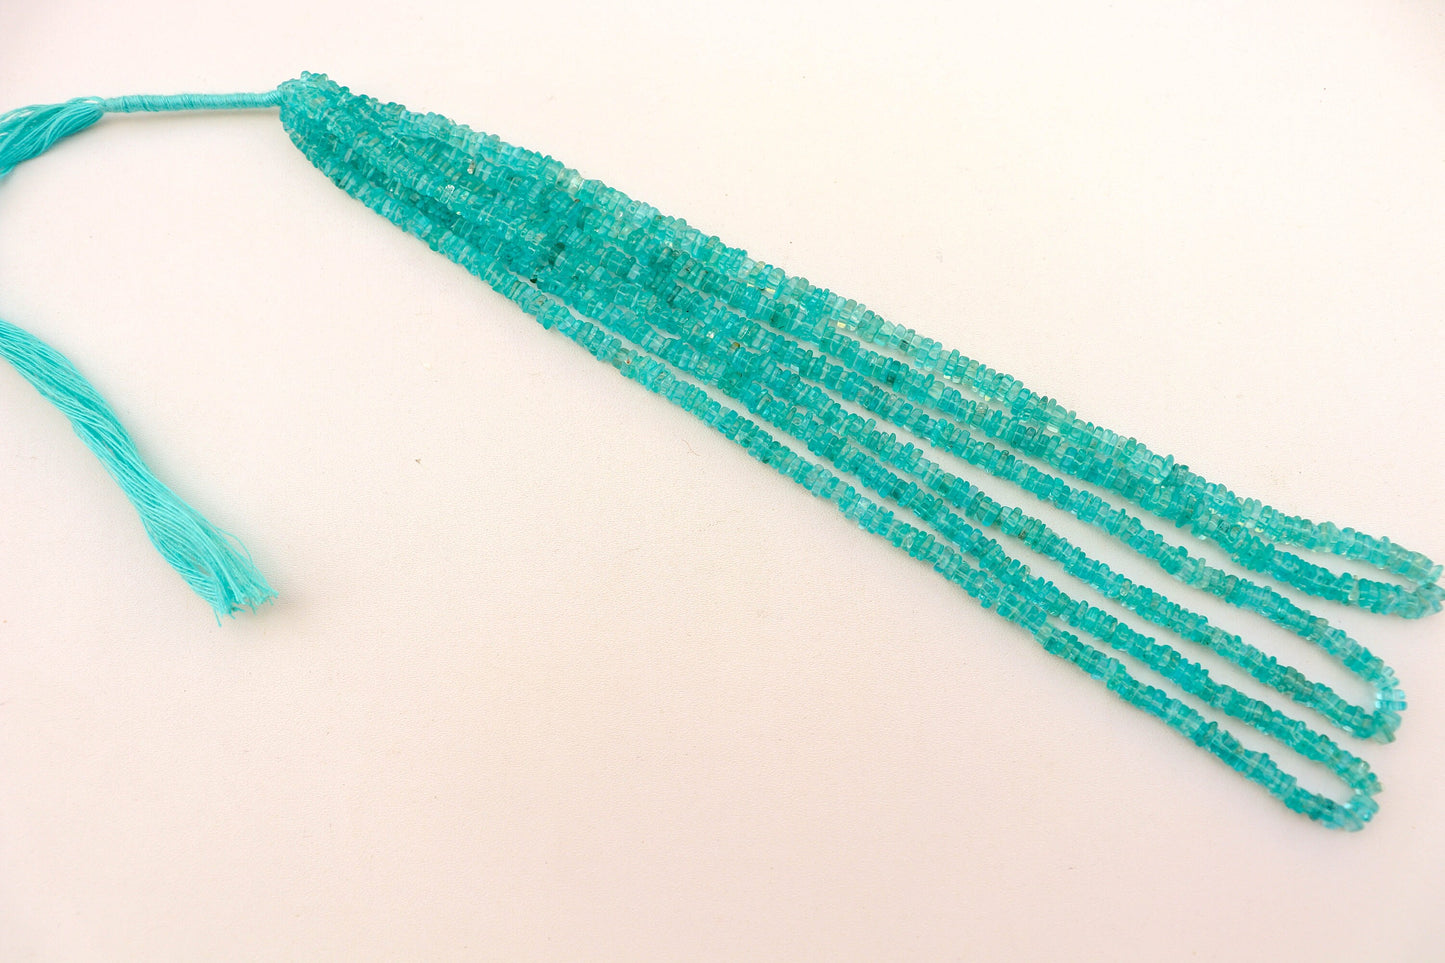 Blue Apatite Beads Smooth Square shape Heishi beads, 4mm, 110 Pieces Approx,  Apatite Gemstone beads for Jewelry making